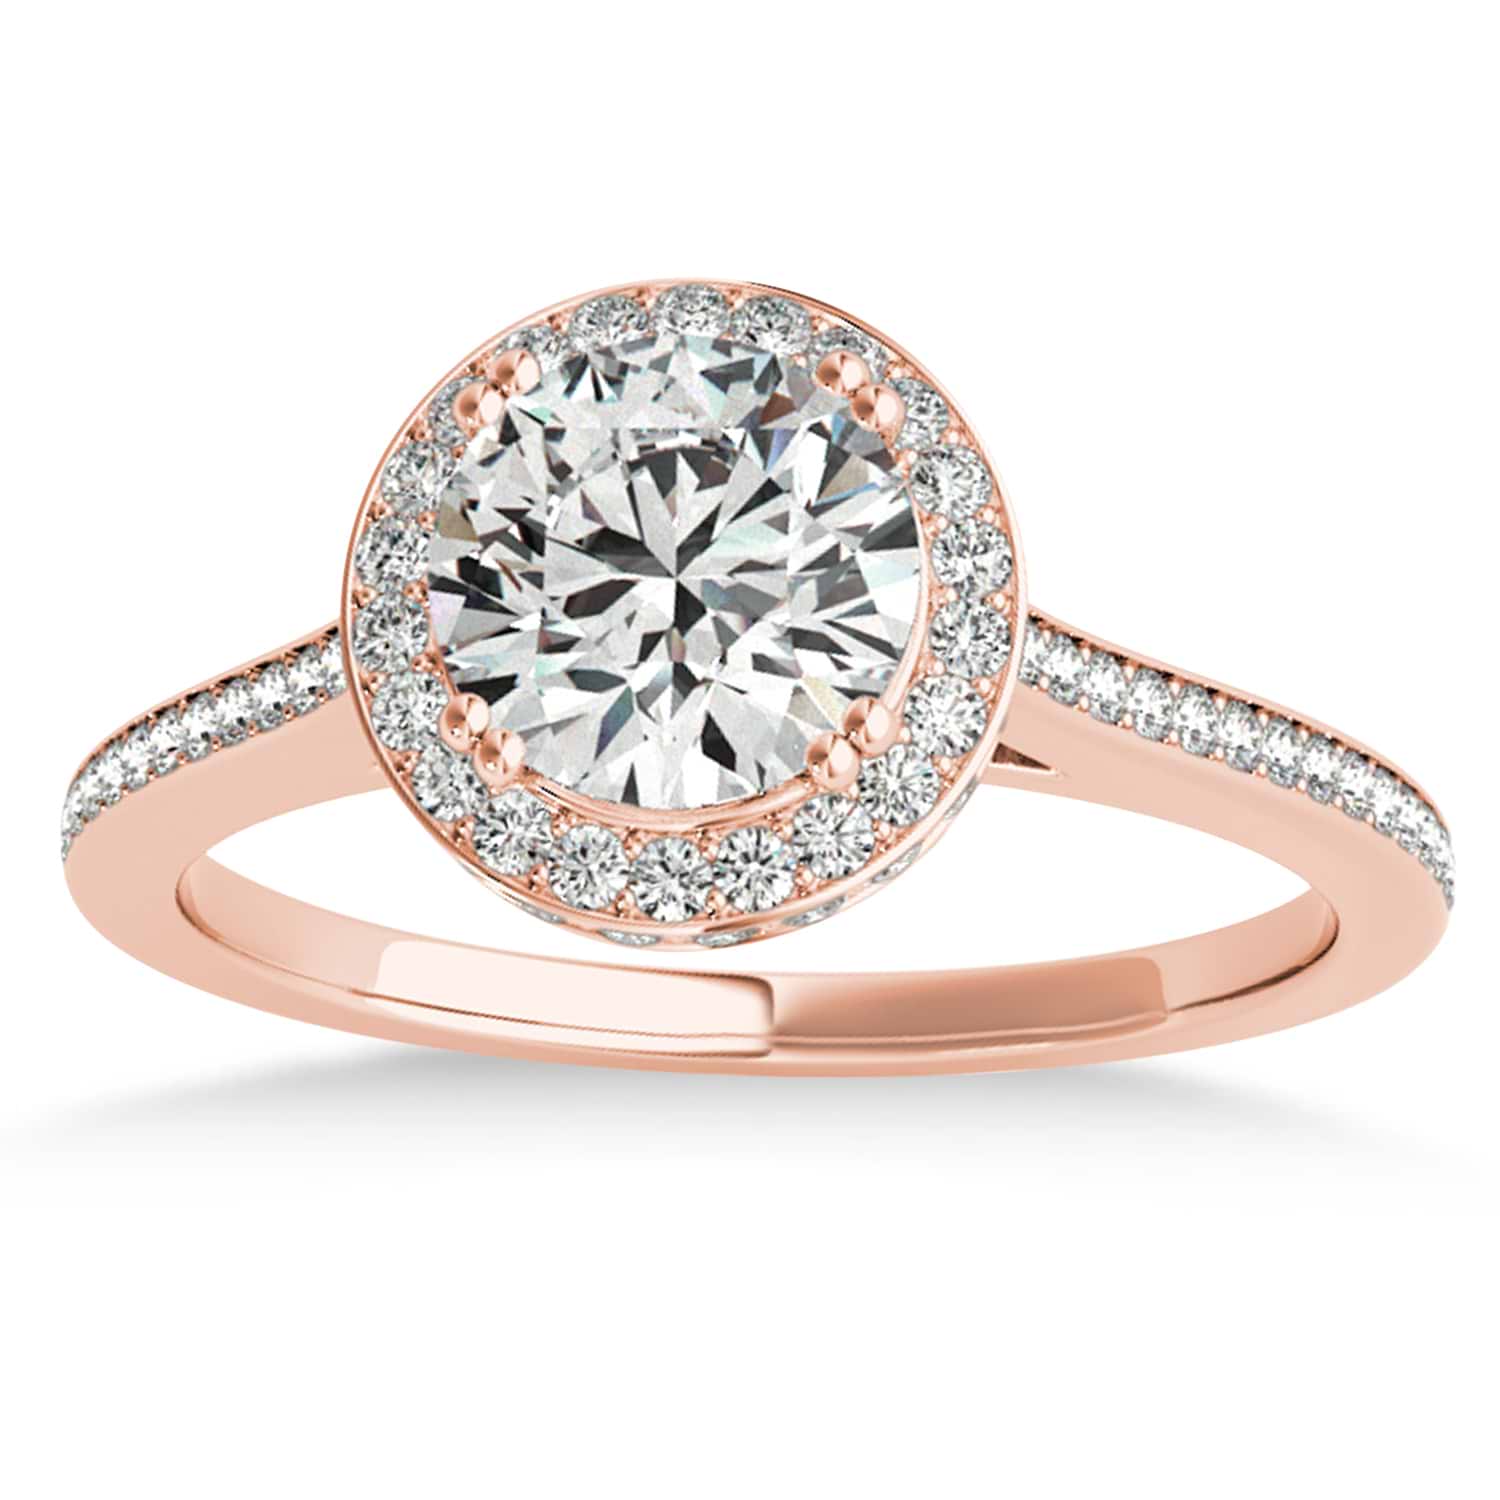 Diamond Halo Round Engagement Ring in 14k Rose Gold (0.48ct)